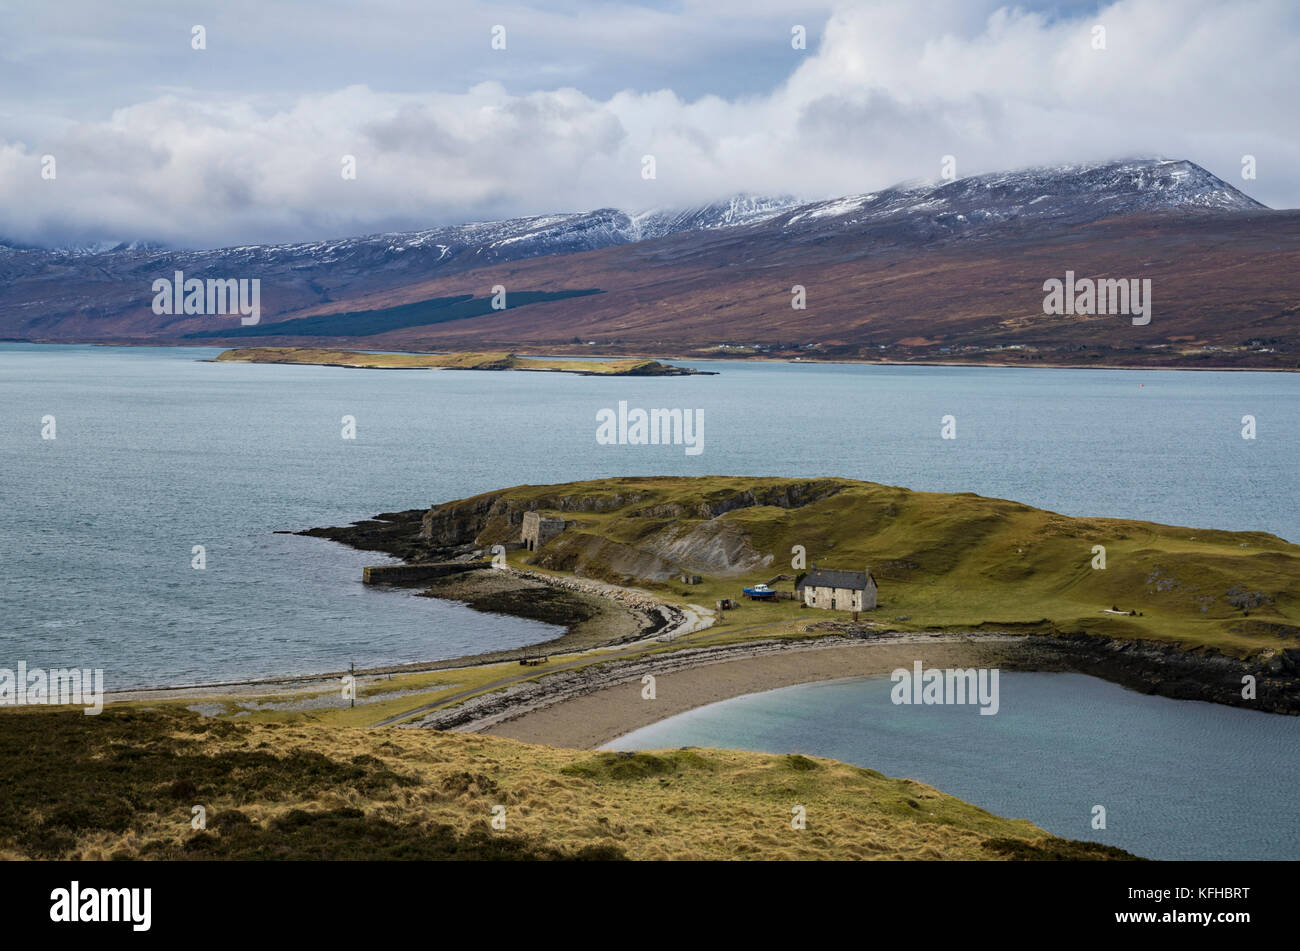 View of Ard Neackie peninsula, Loch Eriboll in the Scottish Highlands, part of North Coast 500 tourist route in north coast of Scotland , Sutherland, Stock Photo